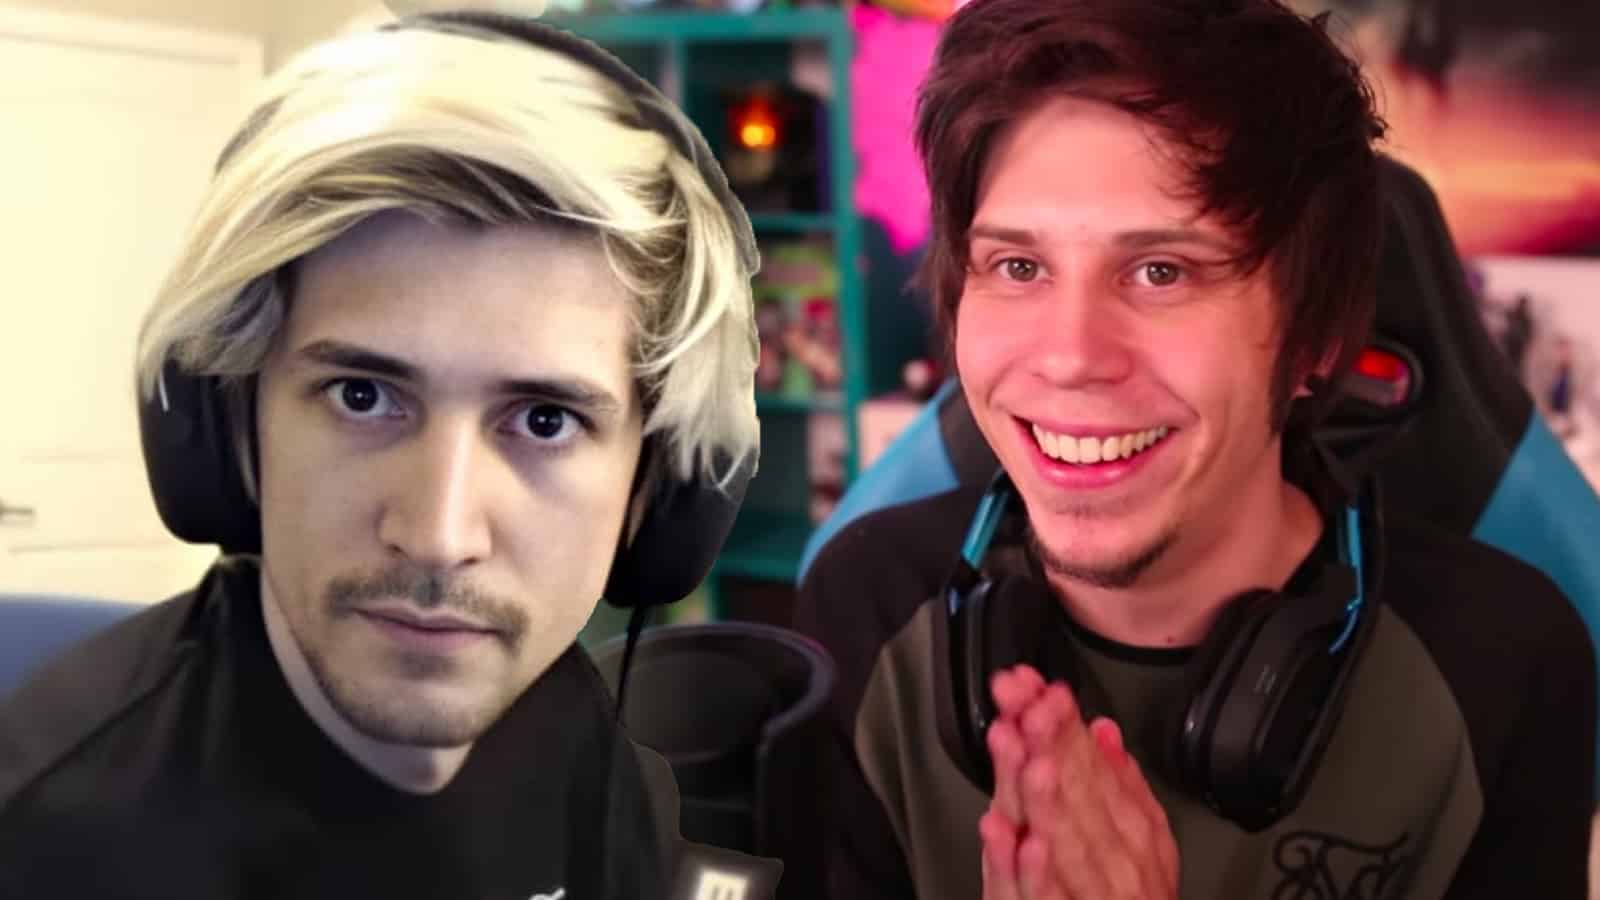 El Rubius challenges xQc to a boxing match during Ibai’s Year II Evening